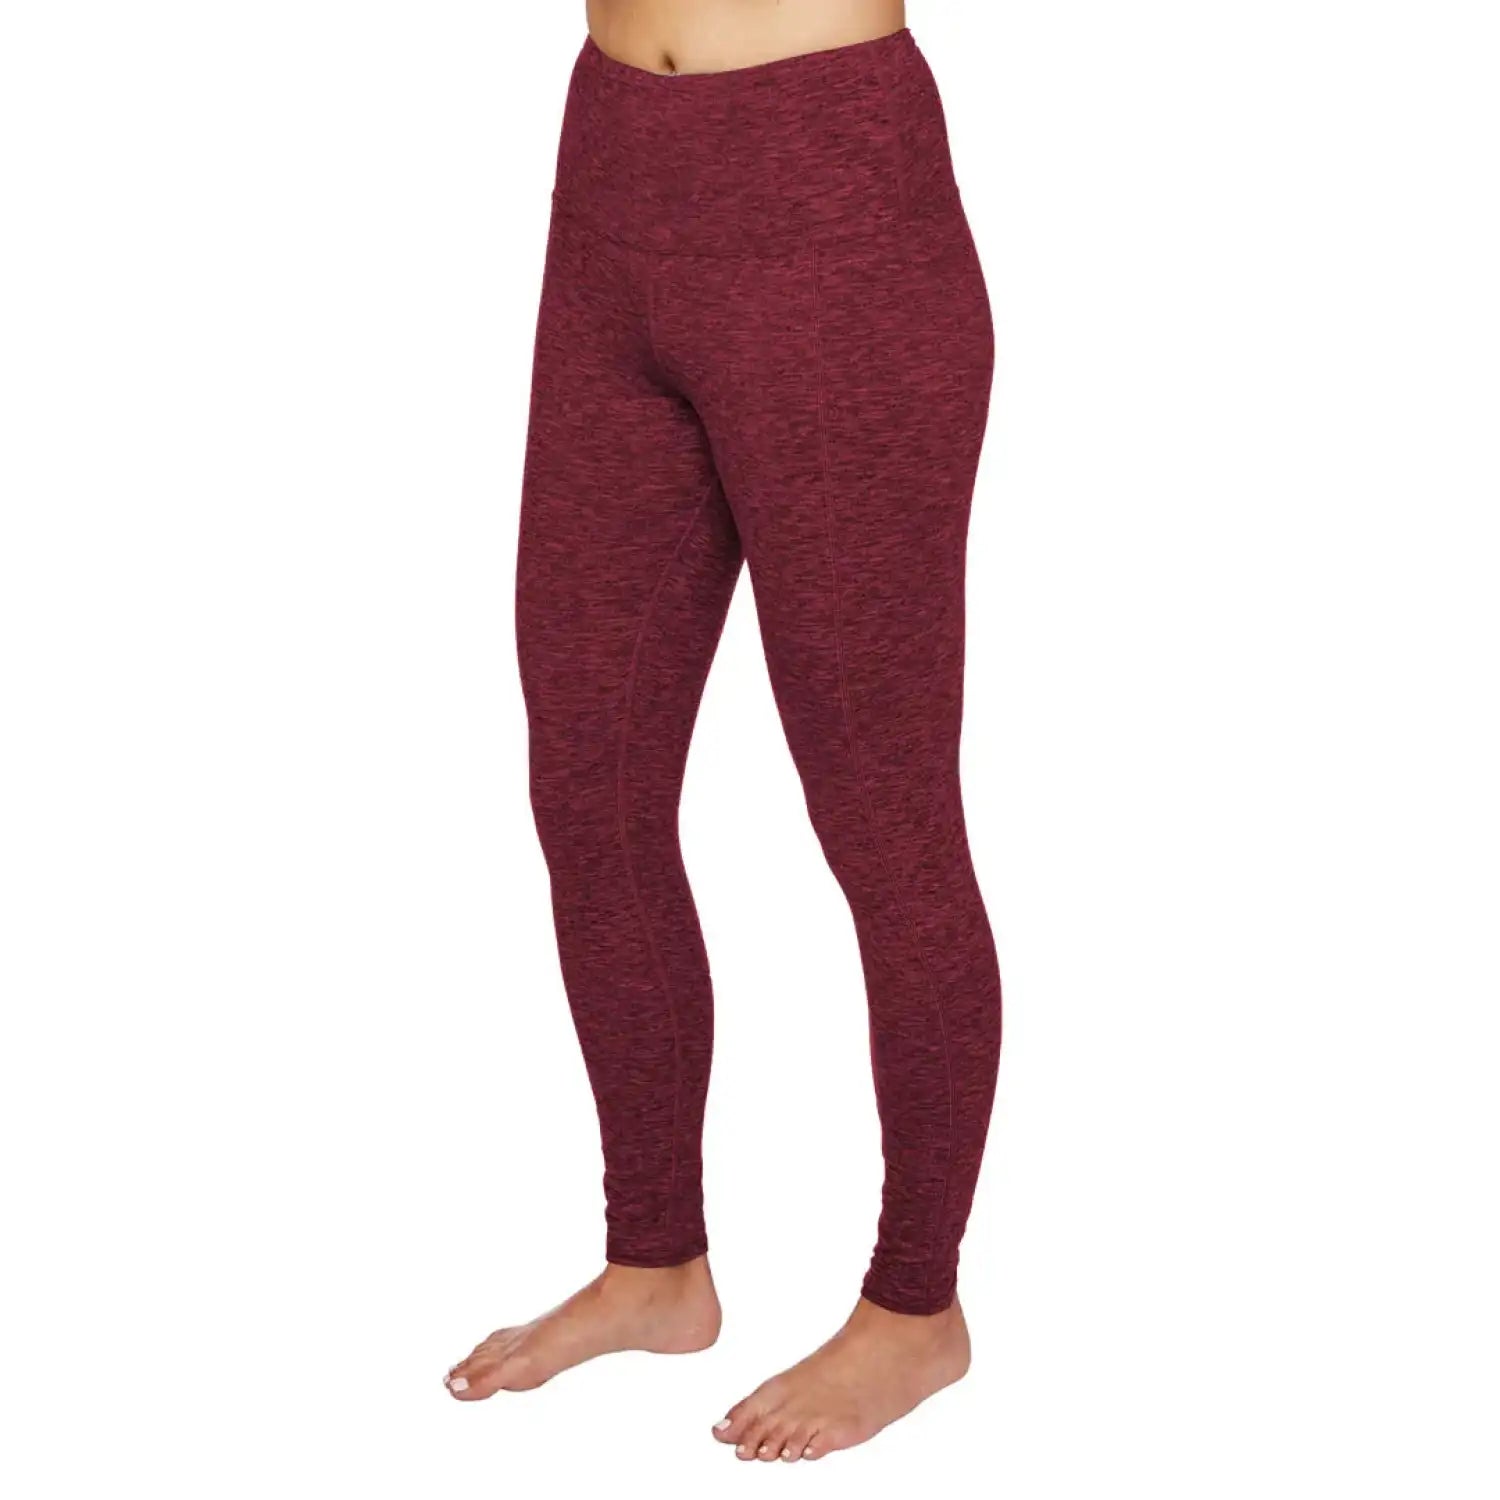 Hot Chillys W's Clima-Tek Tight, Burdundy Heather, front view on model